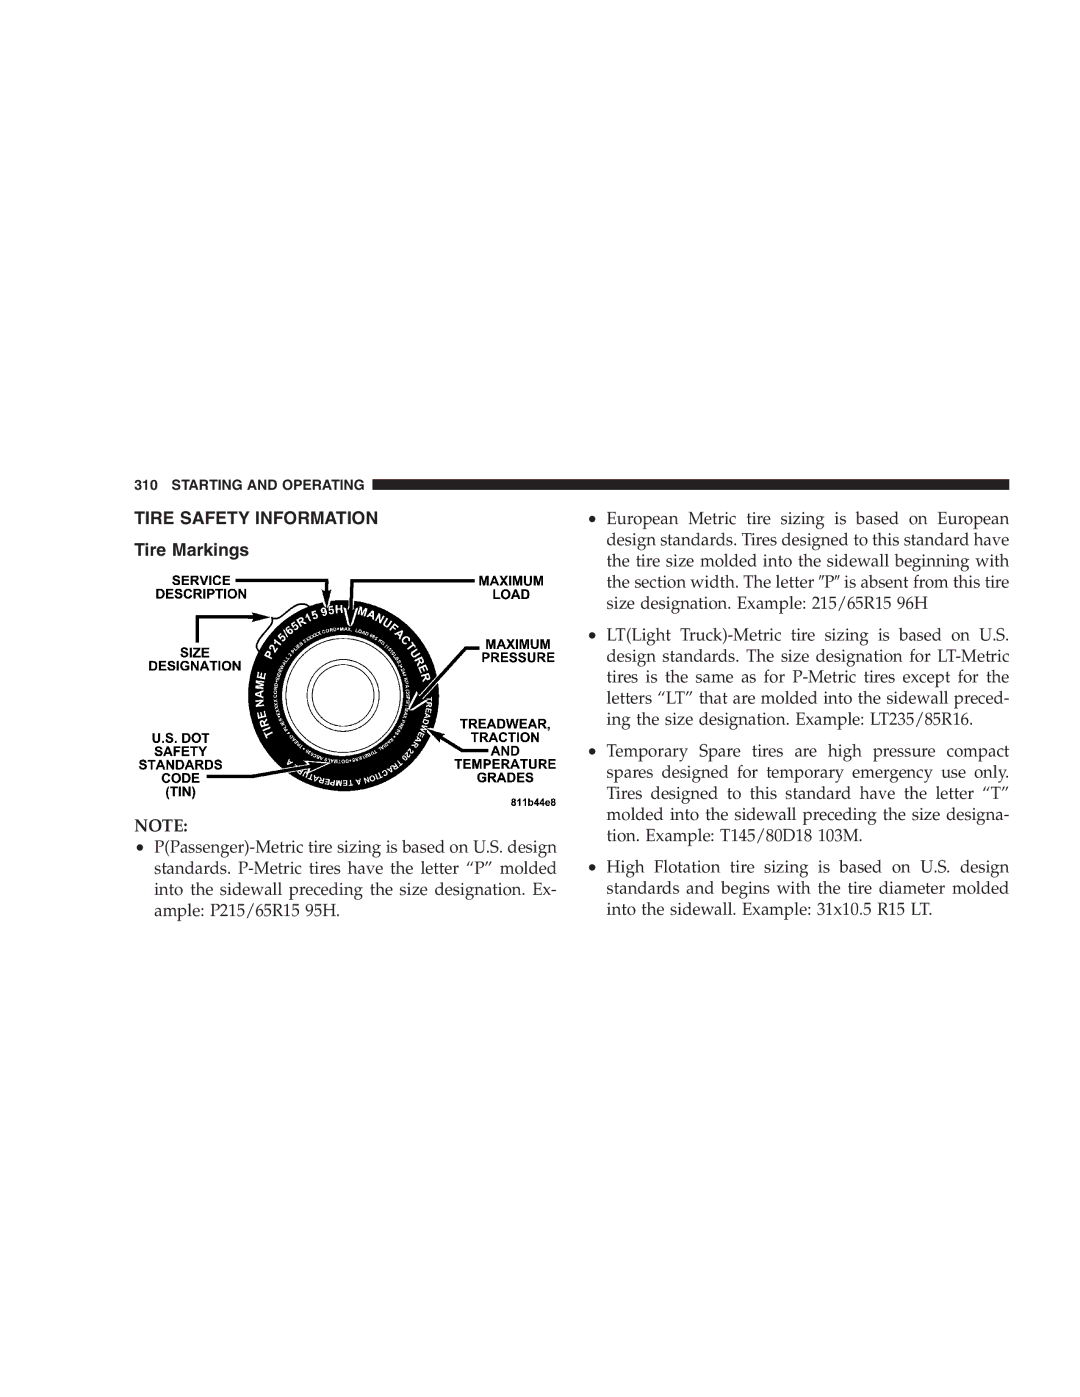 Chrysler 2005 Town and Country manual Tire Safety Information, Tire Markings 